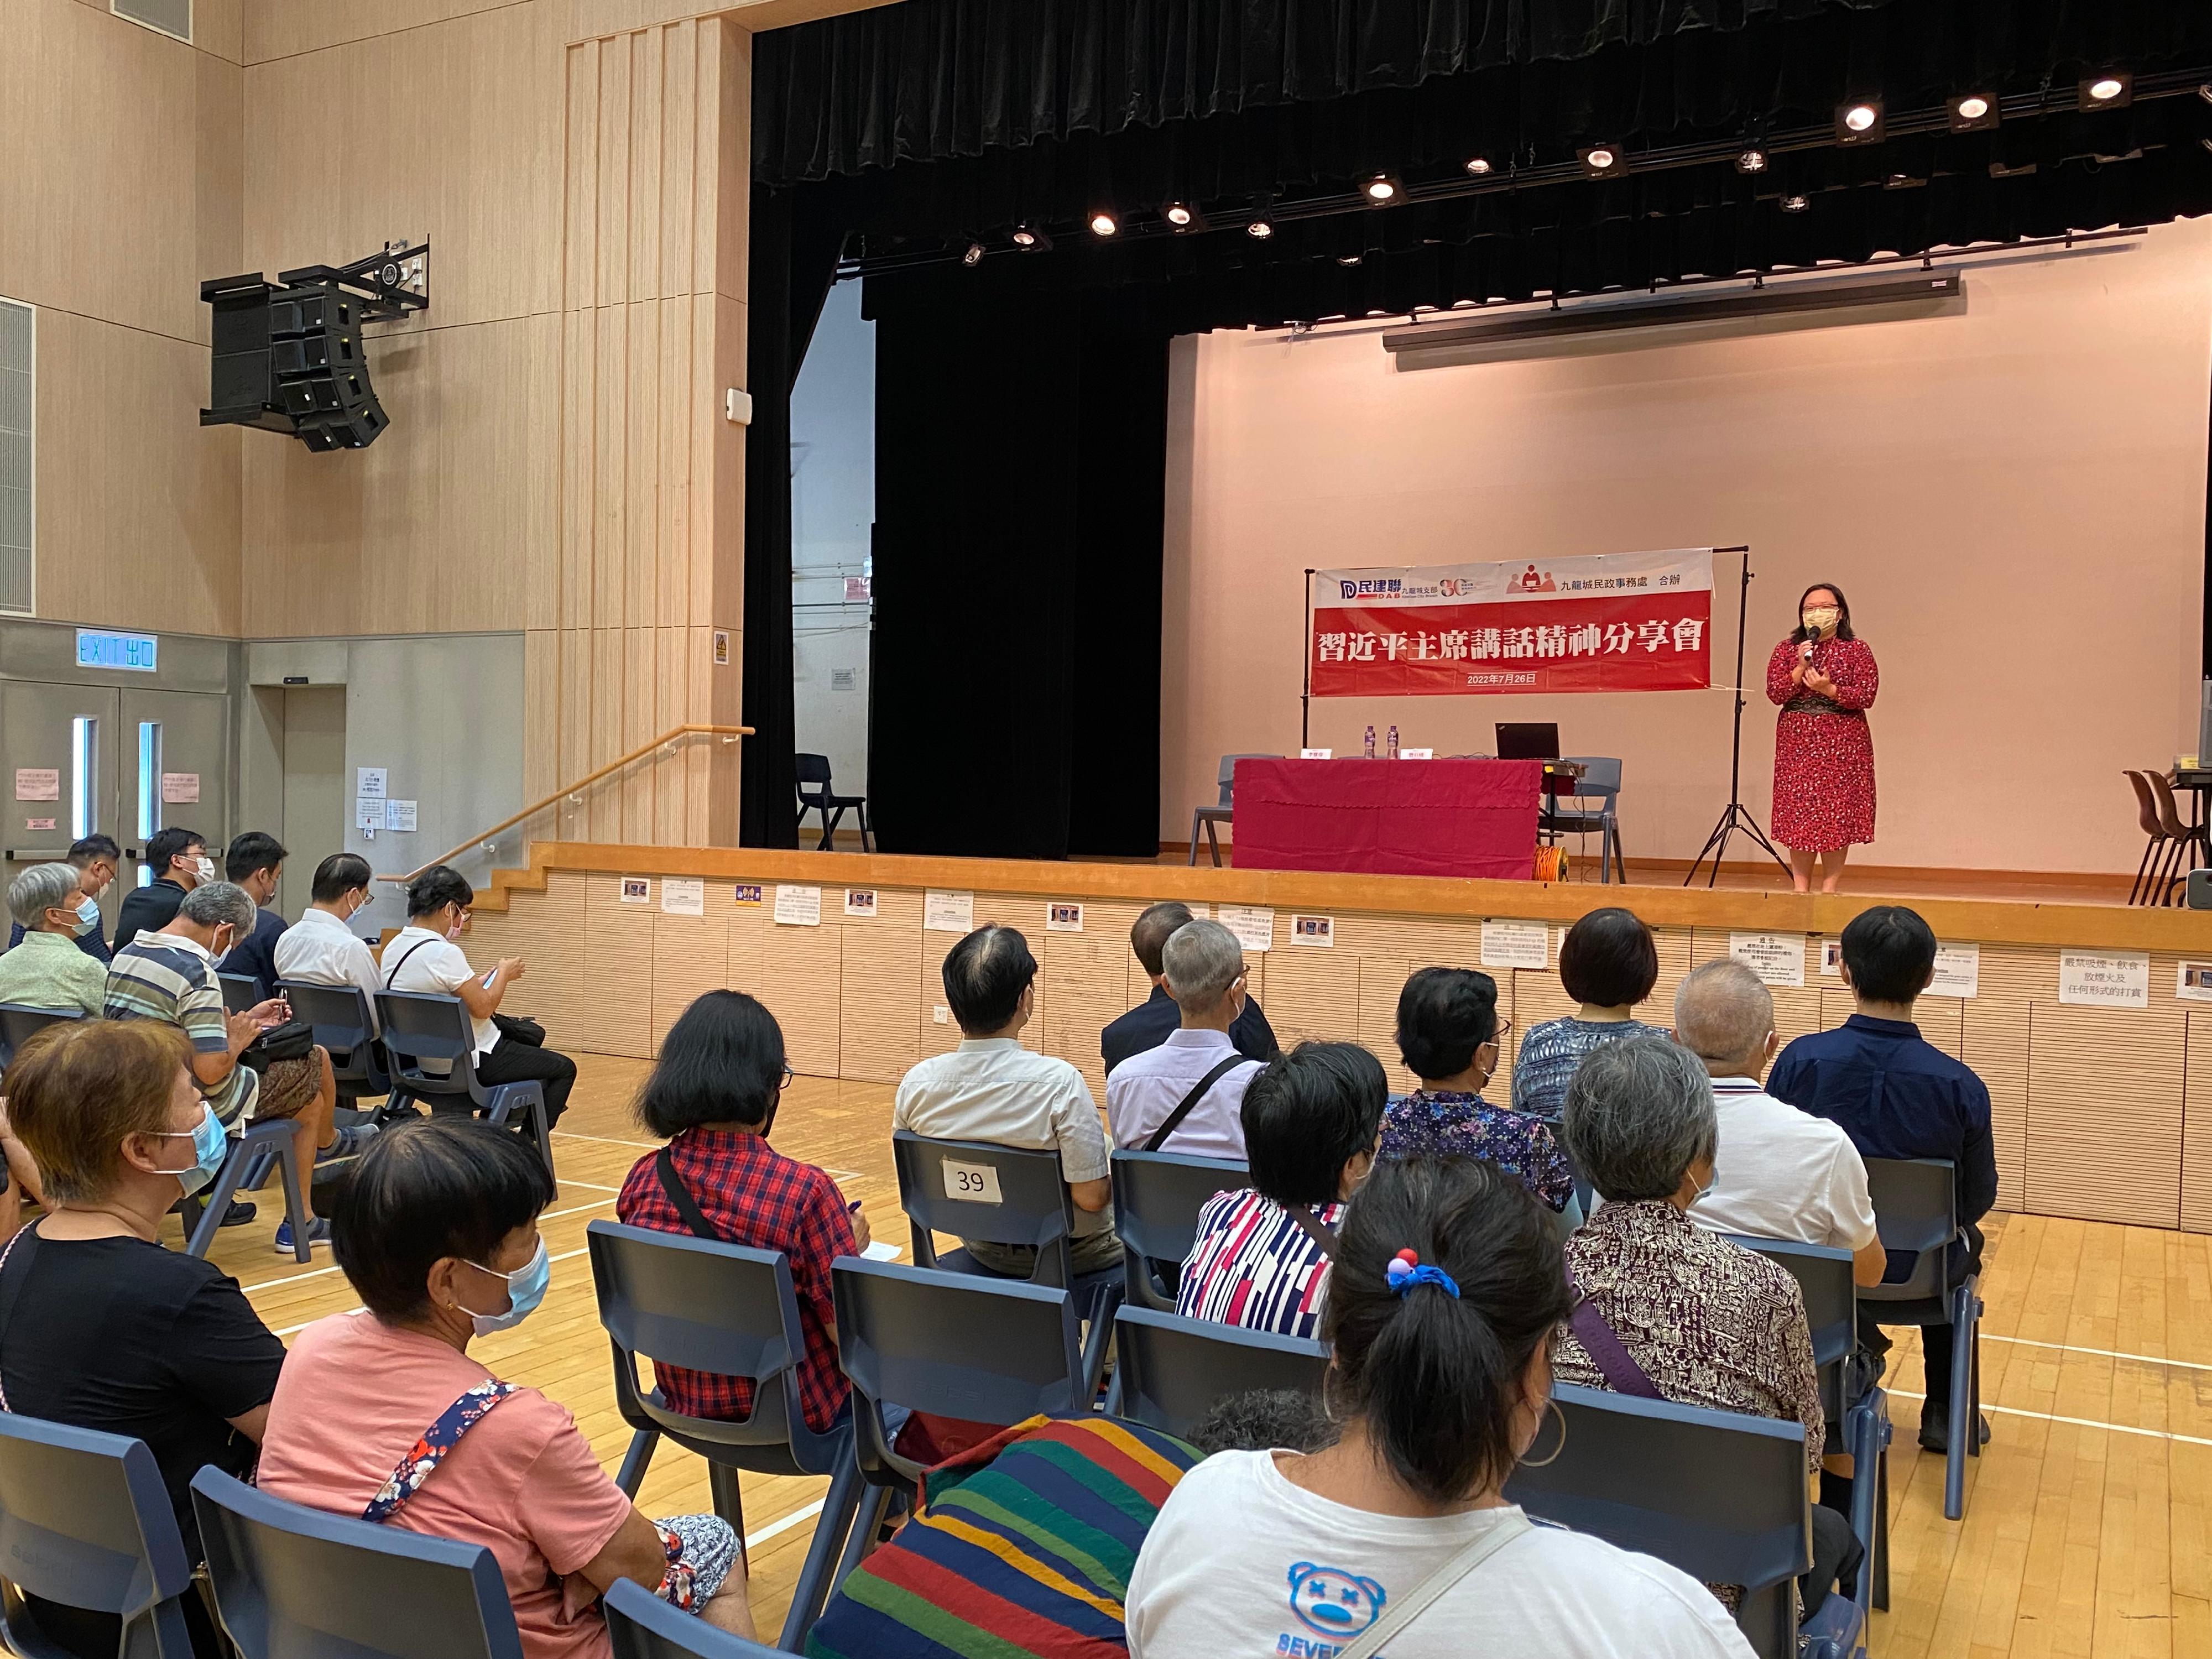 The Kowloon City District Office, in collaboration with the Kowloon City Branch of the Democratic Alliance for the Betterment and Progress of Hong Kong, jointly held the "Session to Learn About the Spirit of President Xi's Important Speech" at Hung Hom Community Hall on July 26. Photo shows the District Officer (Kowloon City), Miss Alice Choi, delivering a speech at the session.